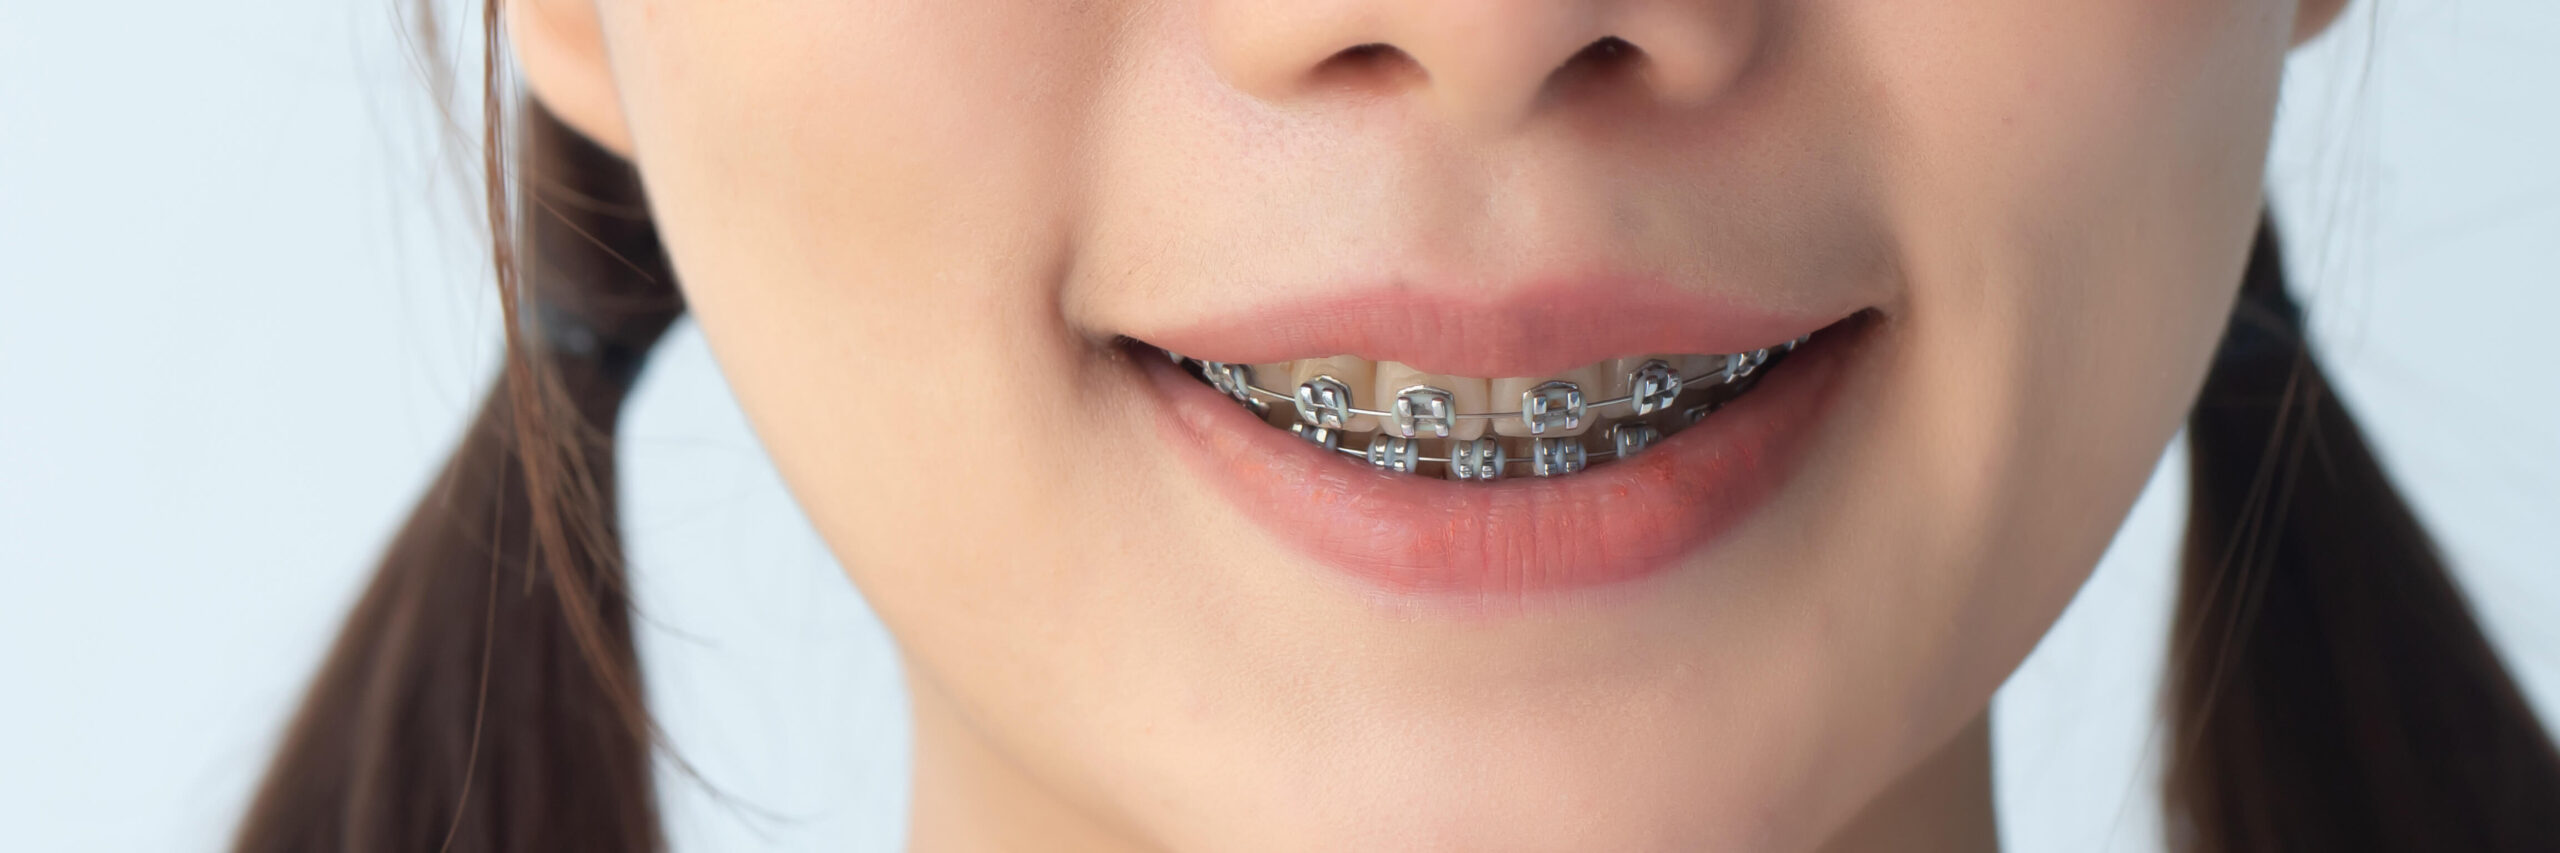 Getting Ready for Your Child’s Orthodontic Journey 